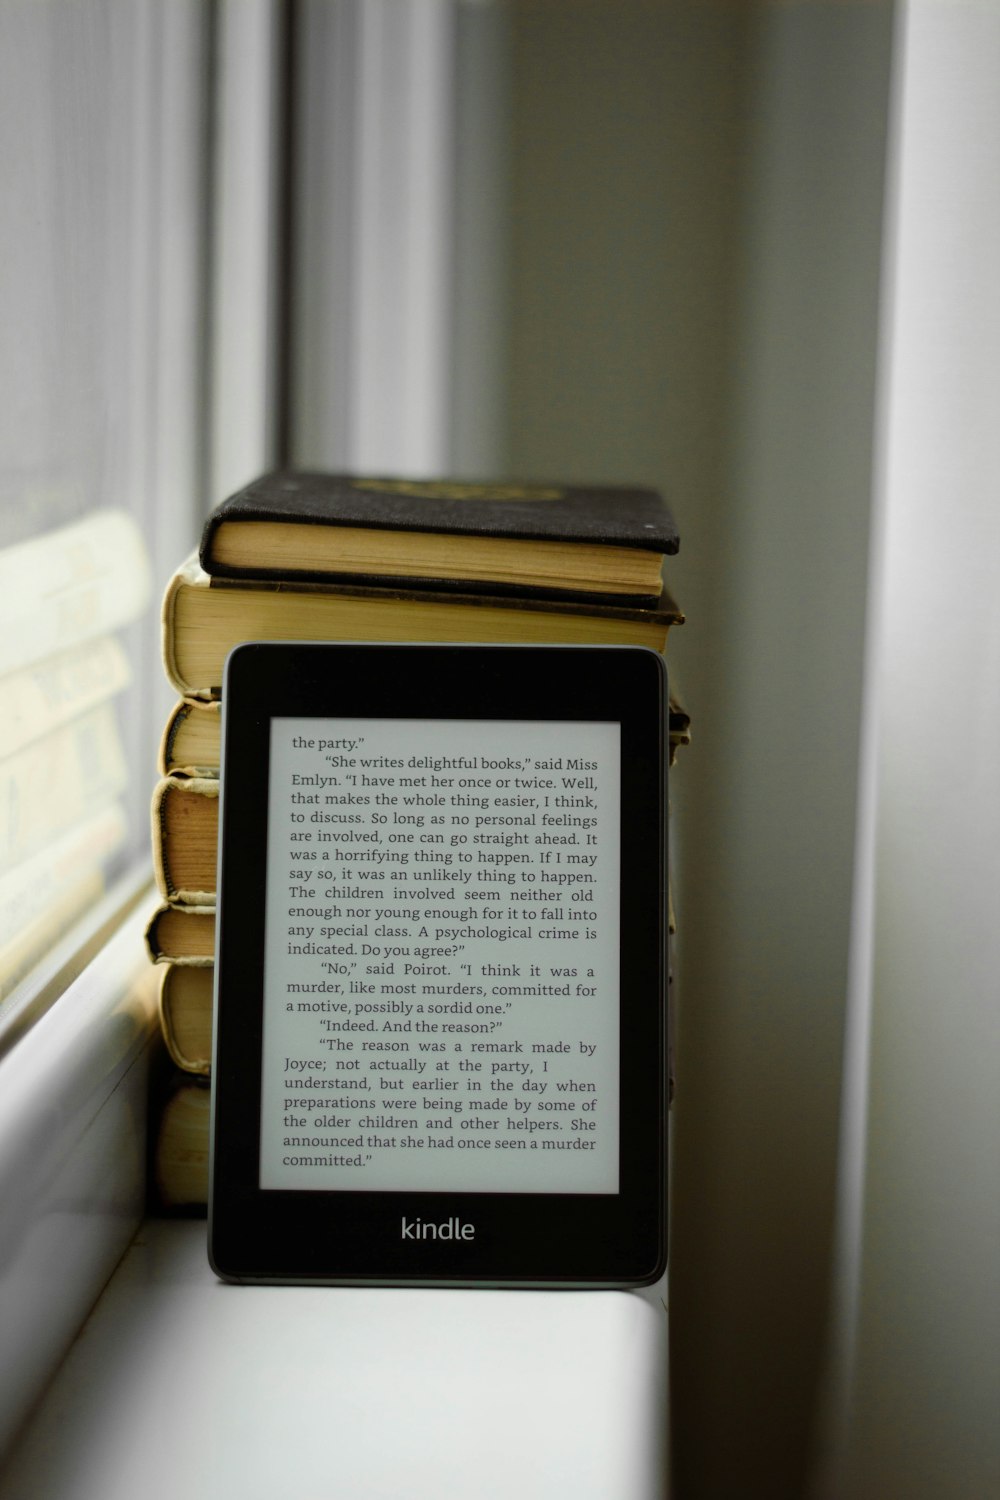 a kindle sitting on a window sill next to a stack of books